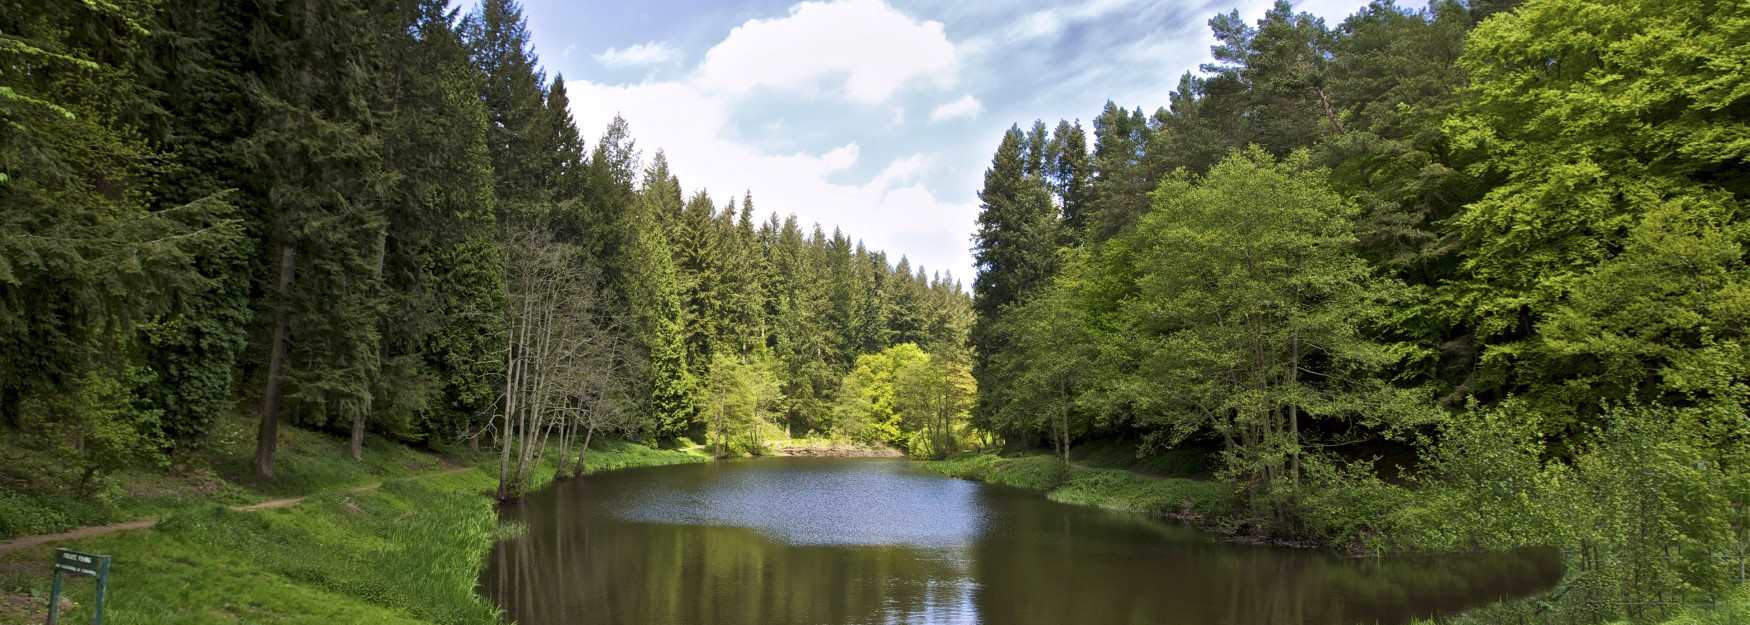 Lake surrounded by trees in the Forest of Dean